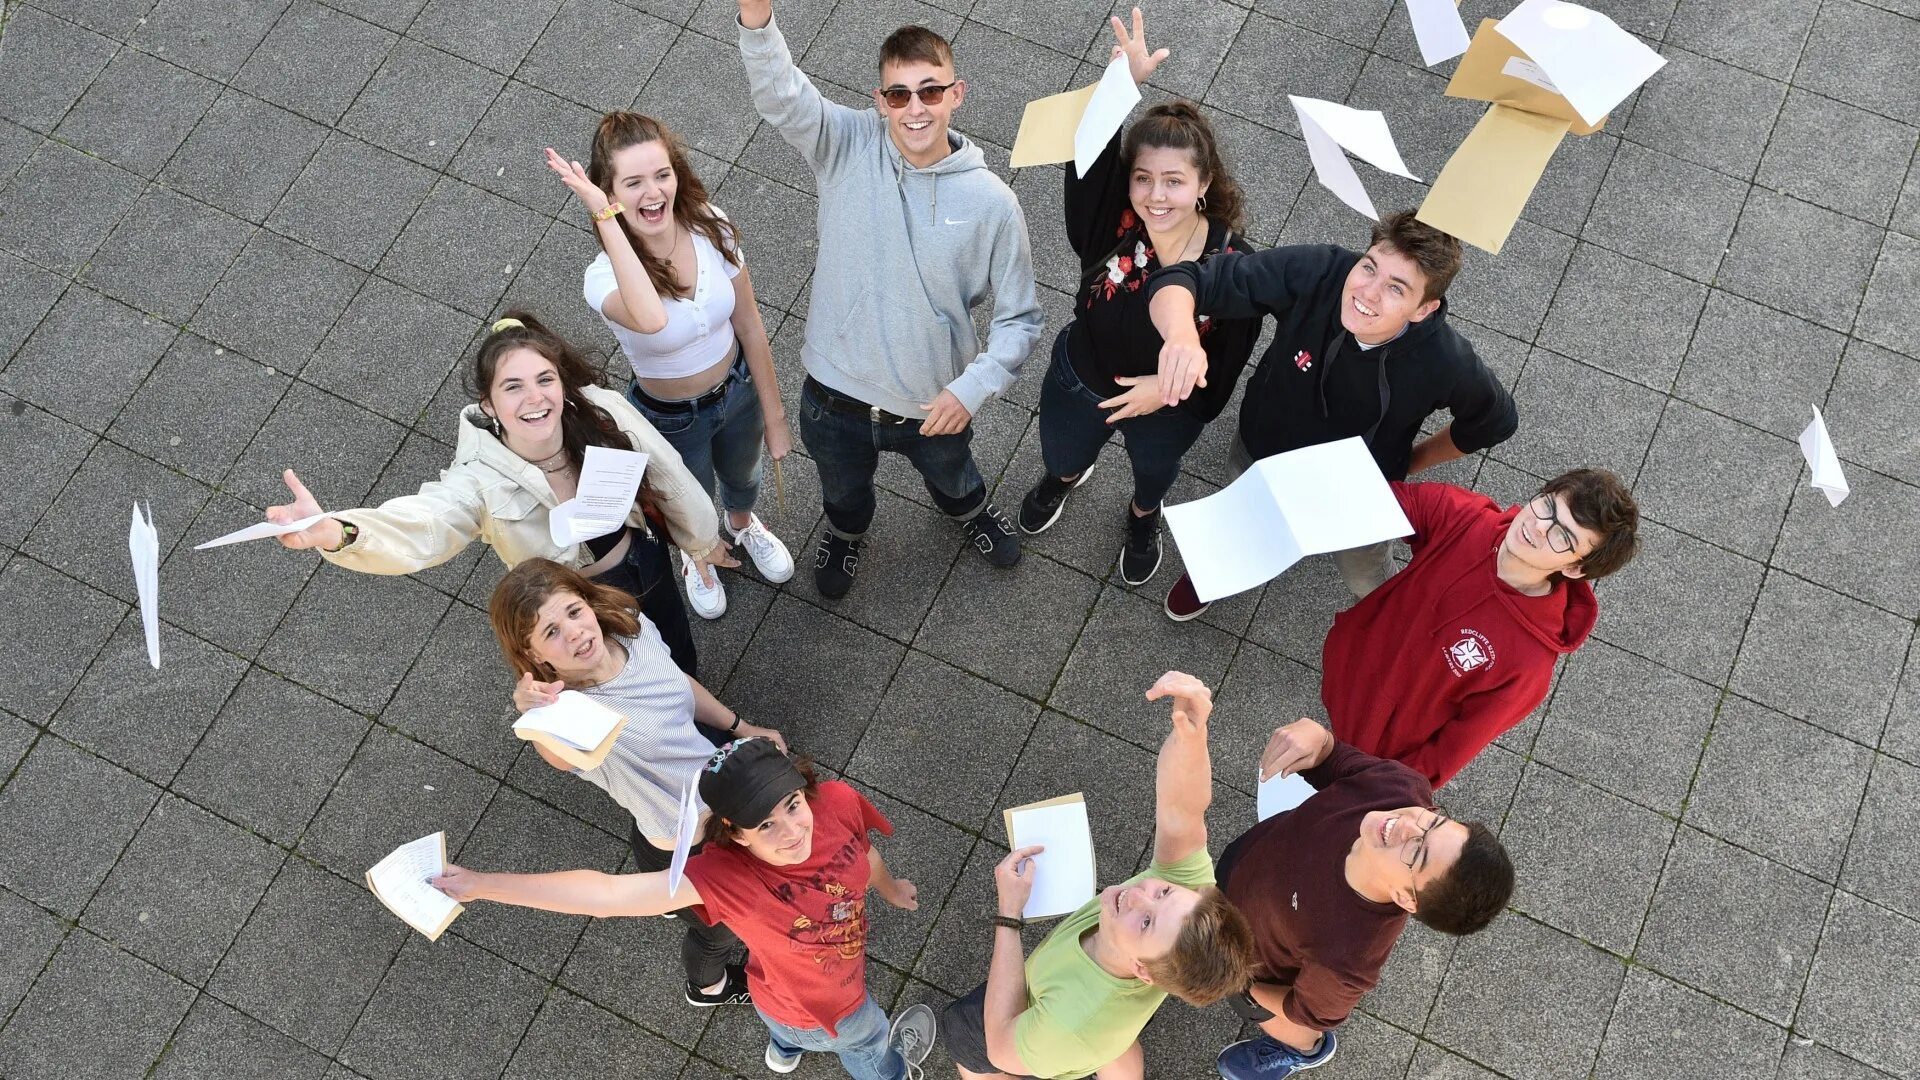 The Levels. A Level Exam. Students celebrate Result. A Level Results. Student papers